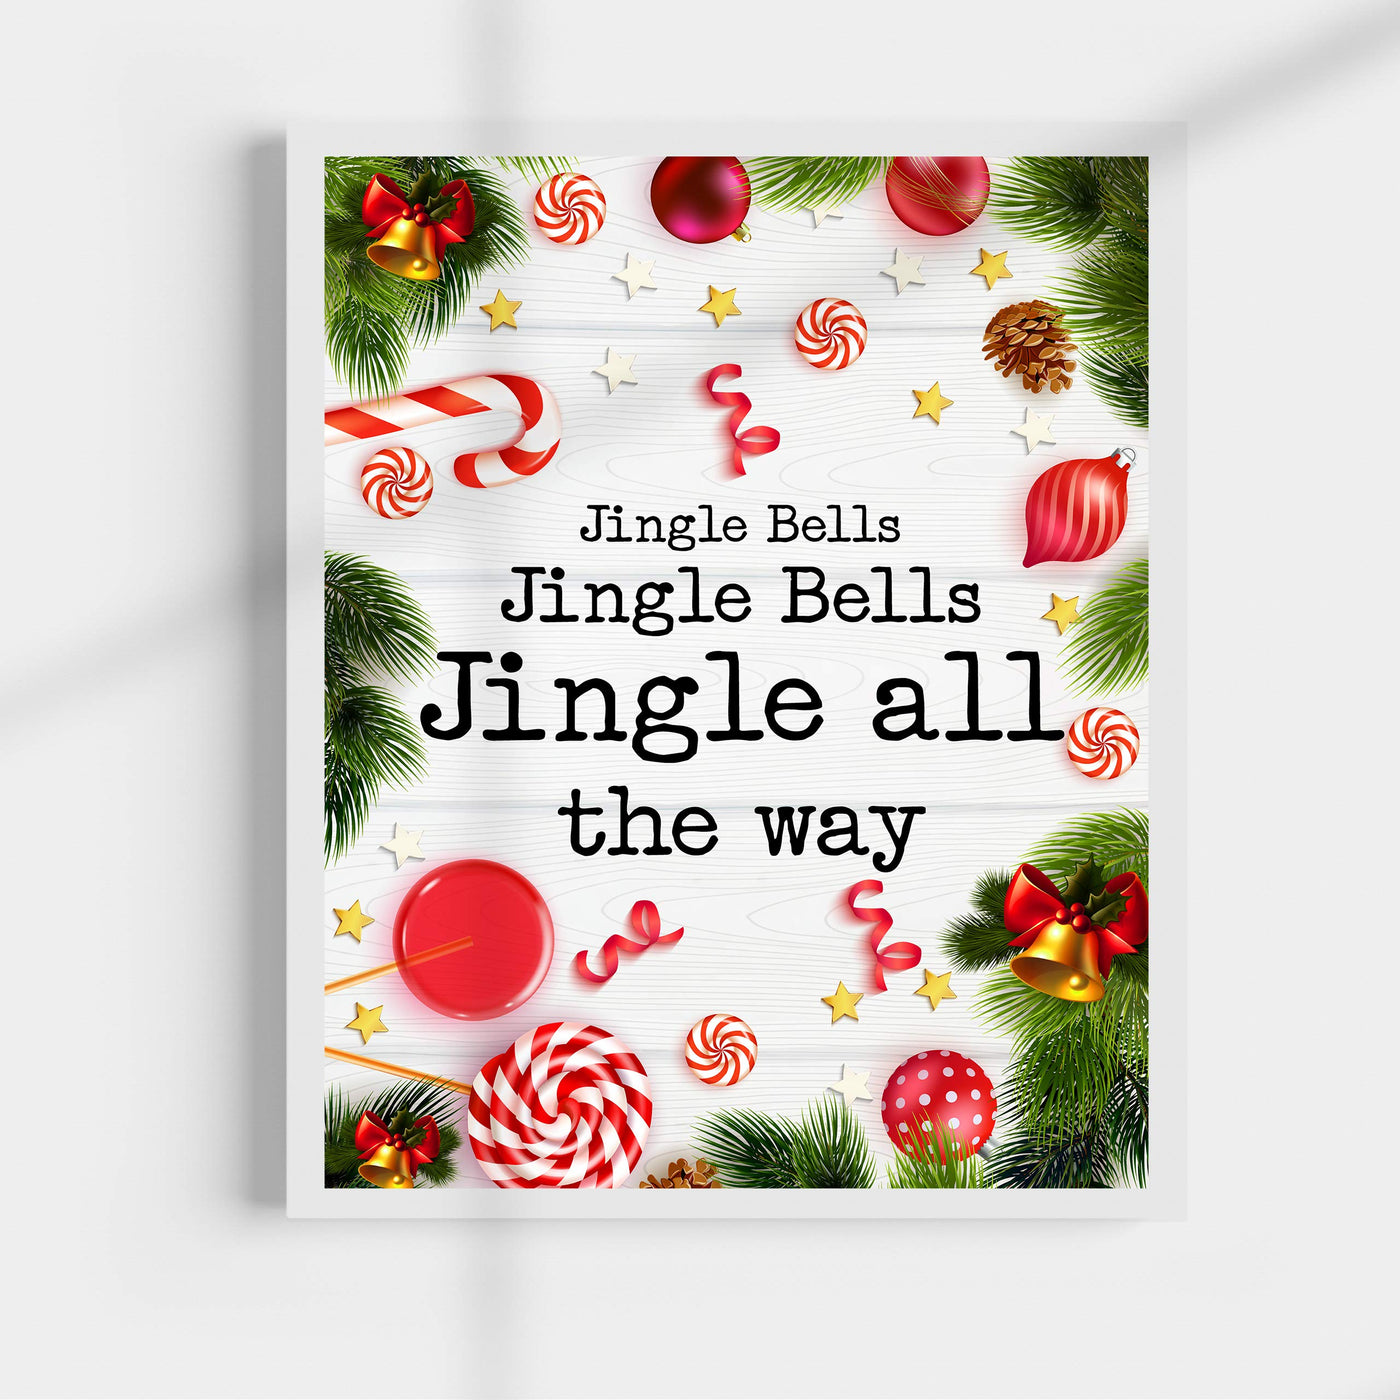 Jingle Bells-Jingle All the Way Christmas Song Wall Art Decor -11 x 14" Holiday Music Wall Print -Ready to Frame. Typographic Home-Welcome-Kitchen-Farmhouse Decor. Display Your Holiday Joy!